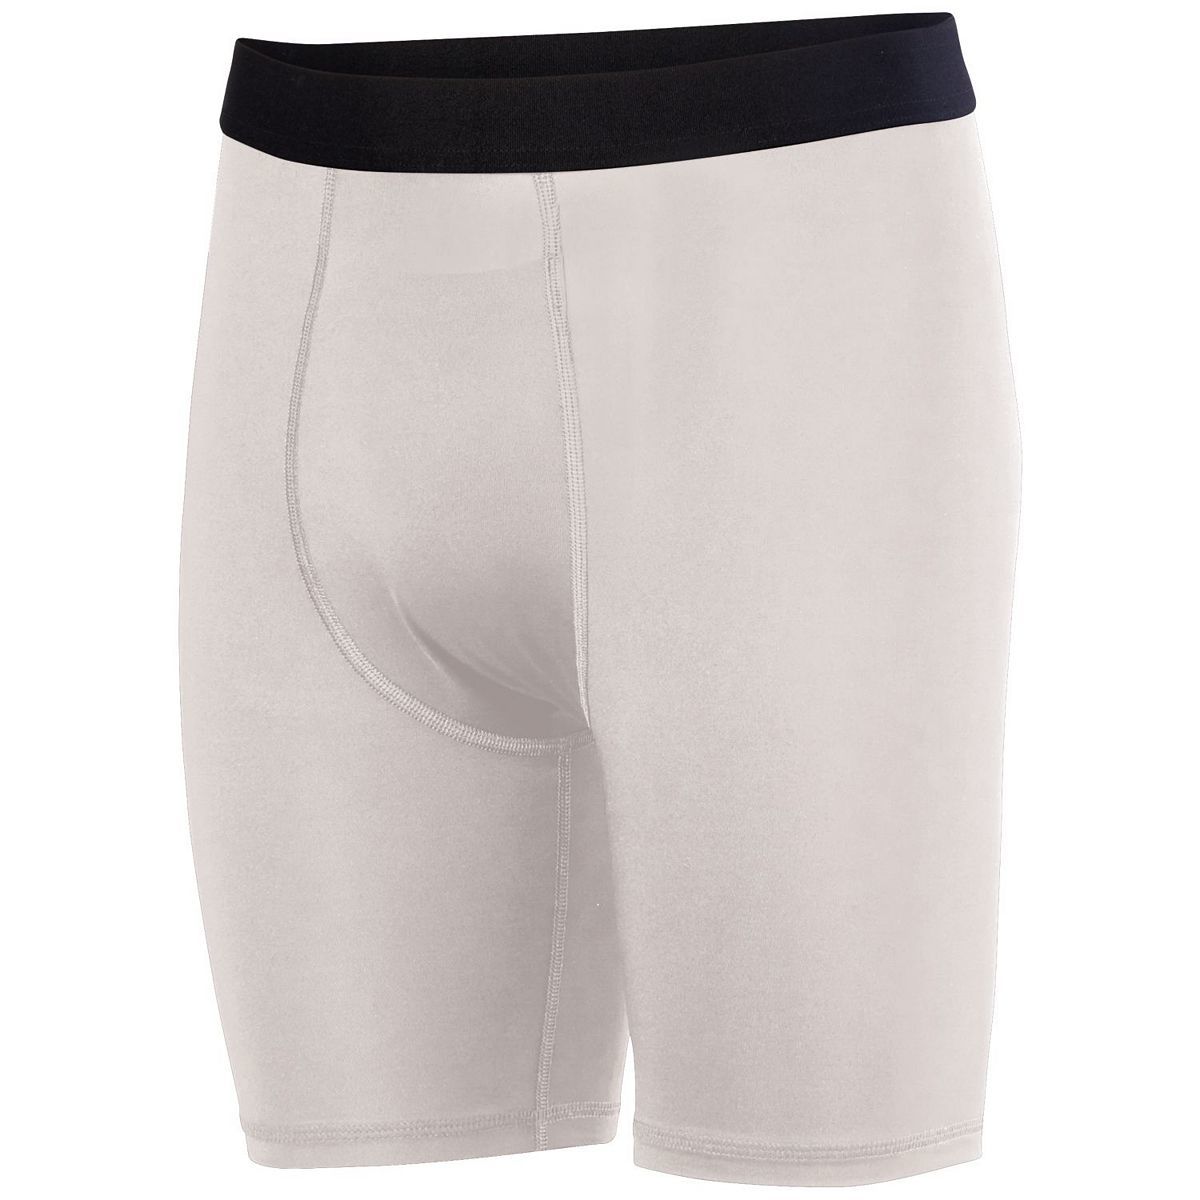 Youth Hyperform Compression Shorts 2616